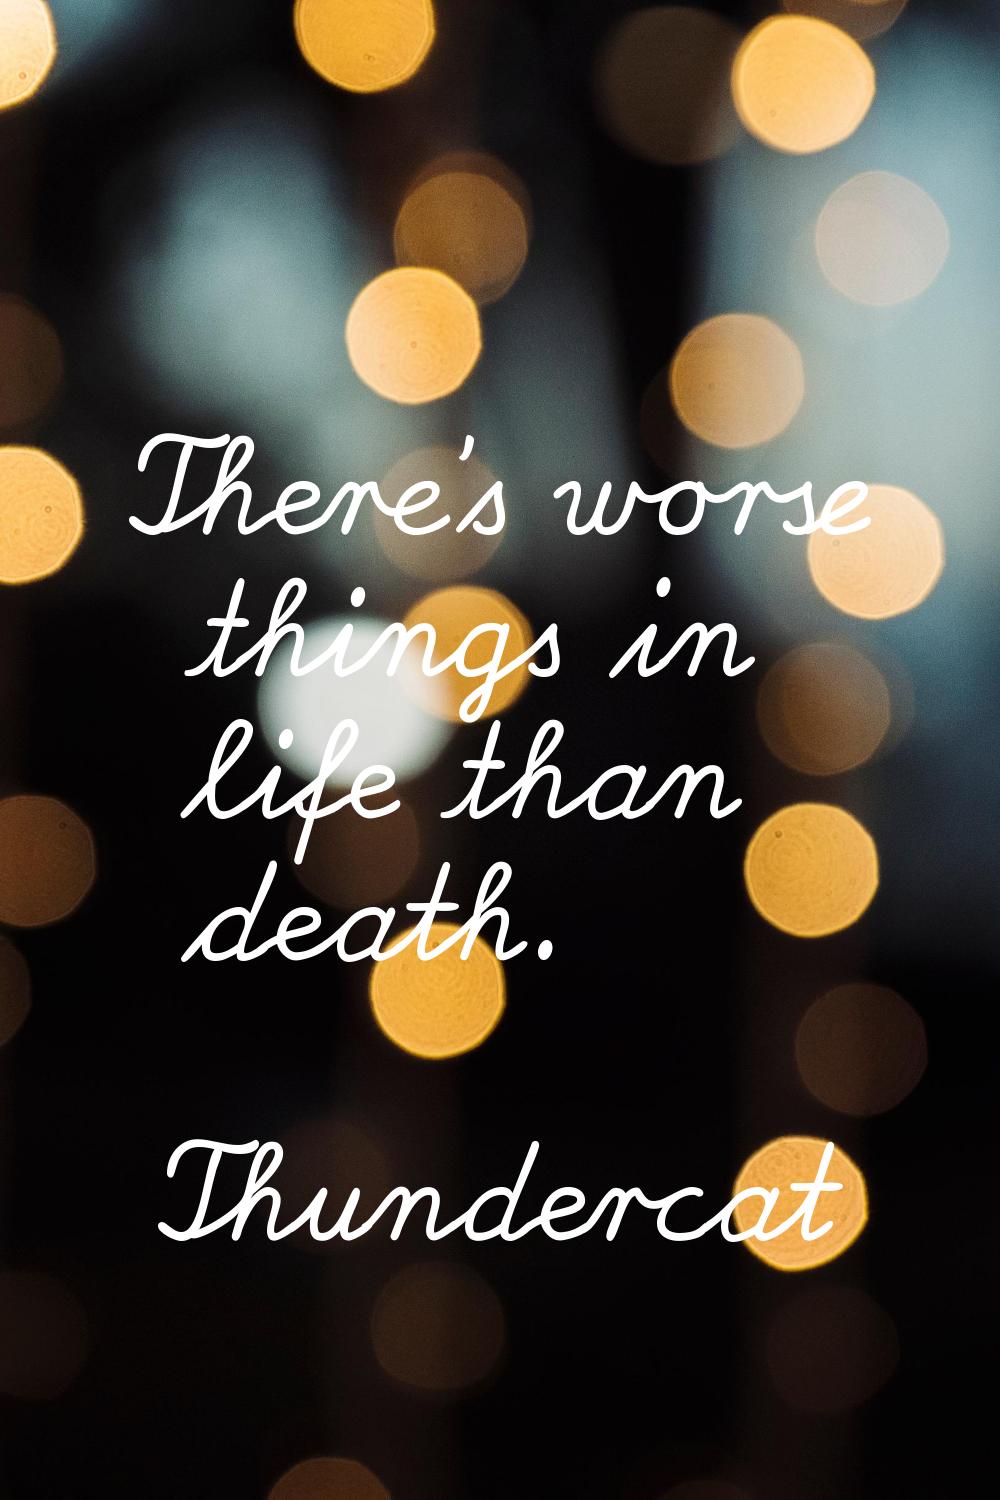 There's worse things in life than death.